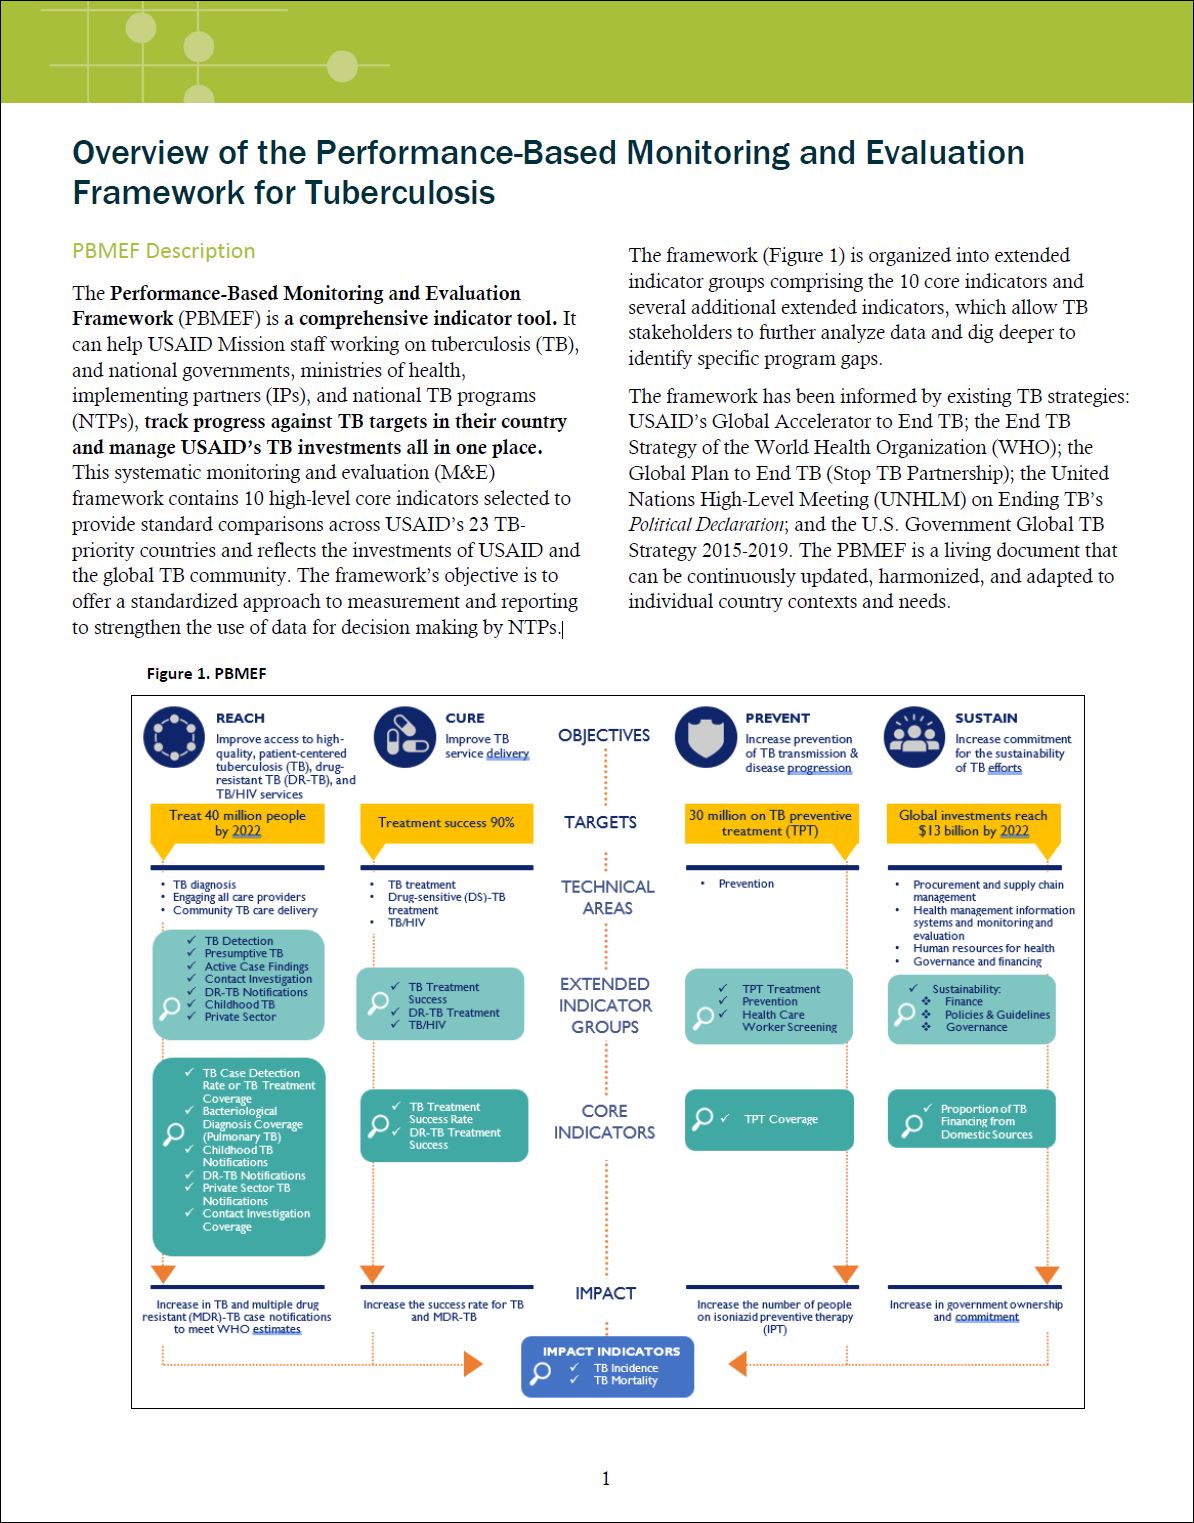 Overview of the Performance-Based Monitoring and Evaluation Framework for Tuberculosis